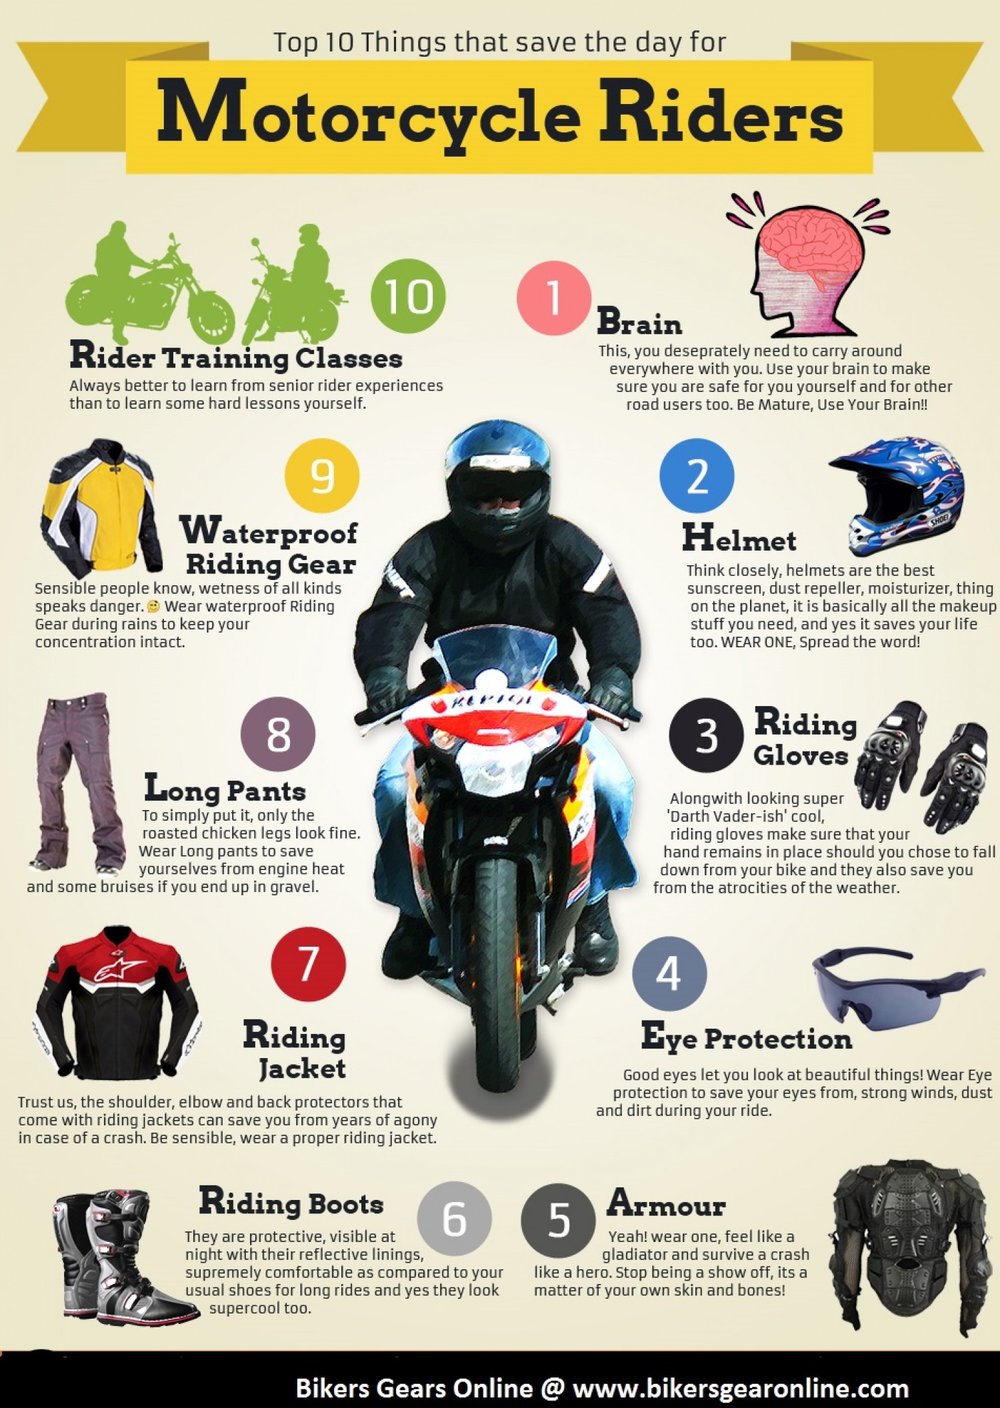 Ducati Motorcycle Safety Tips For Riders Of All Levels